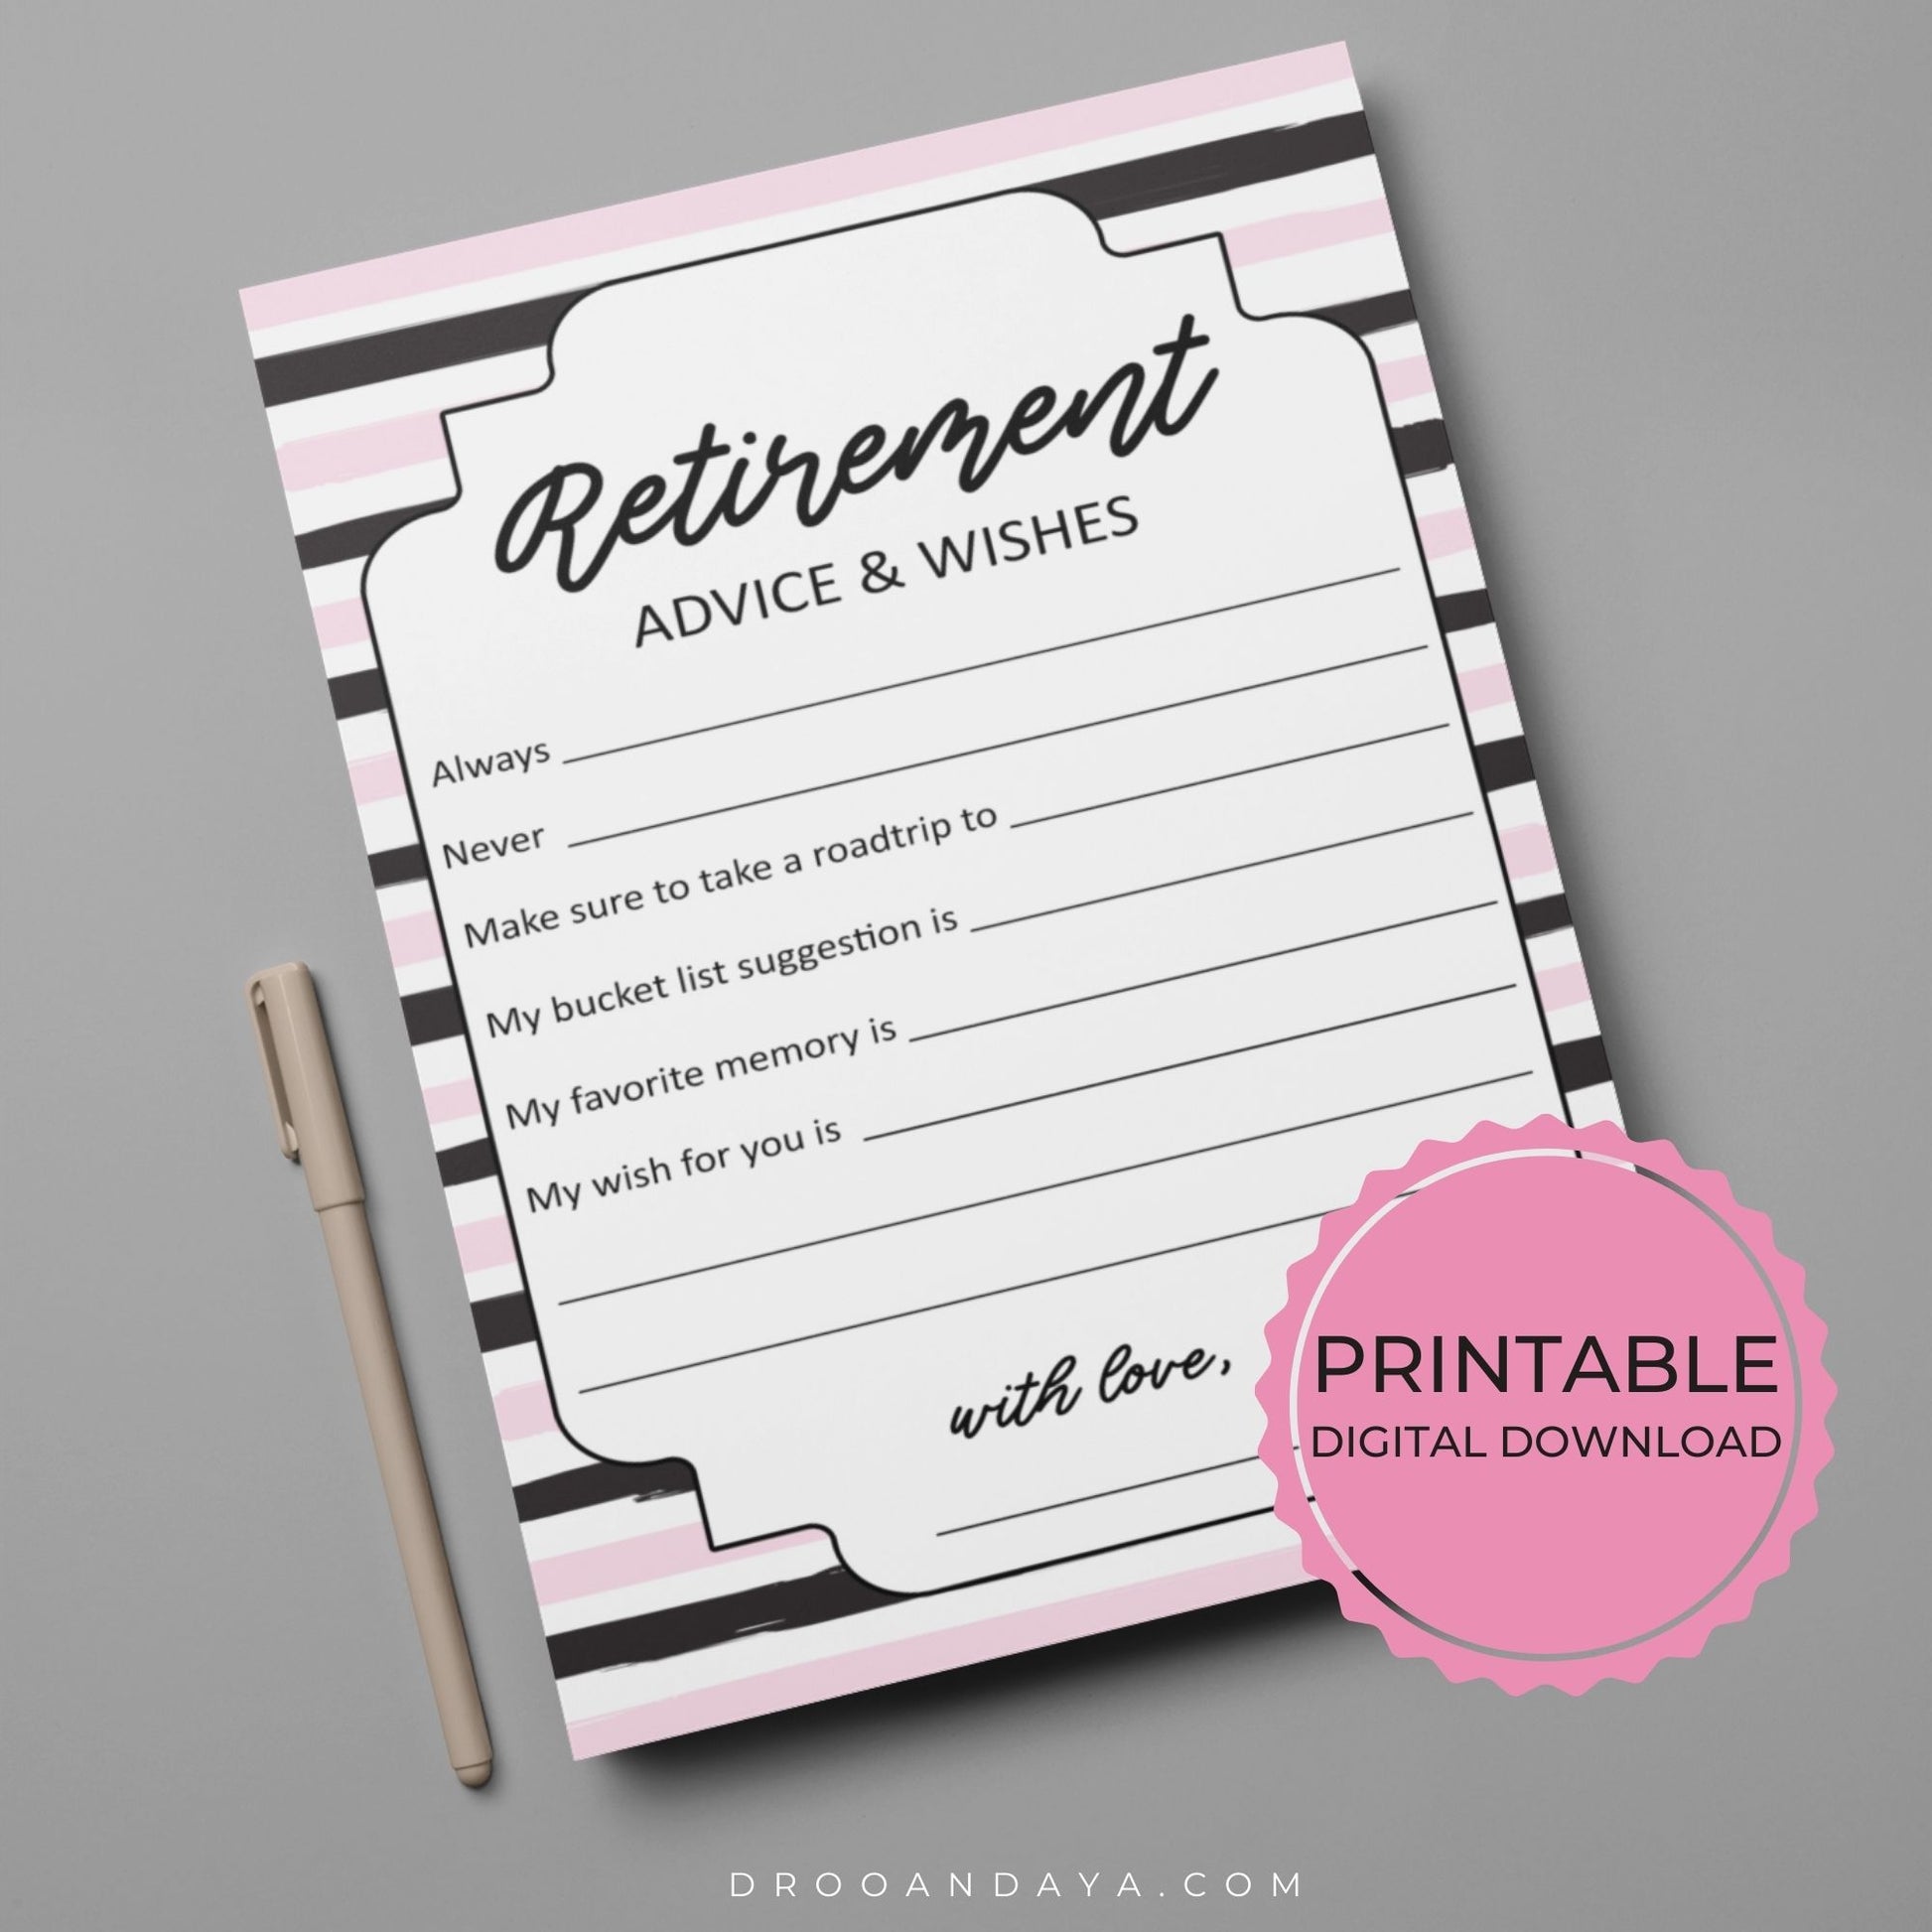 Printable Advice and Wishes Cards for a Retirement Party - Droo & Aya